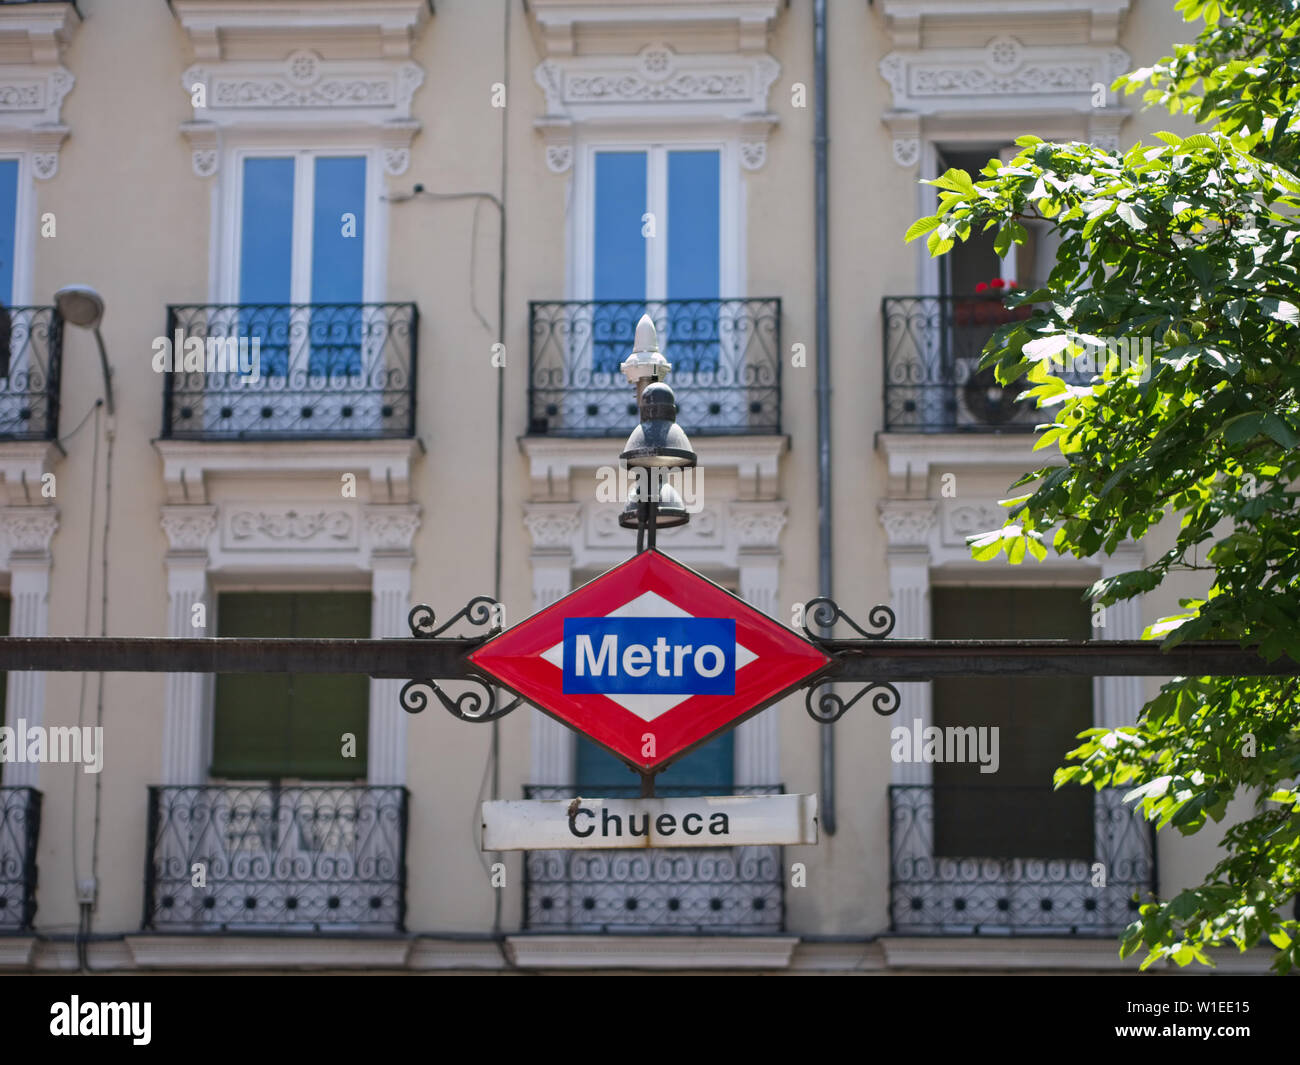 Vintage Metro sign at the Chueca station's entrance. Chueca is a famous station on Line 5 and is well known as Madrid`s LGBT area. Stock Photo